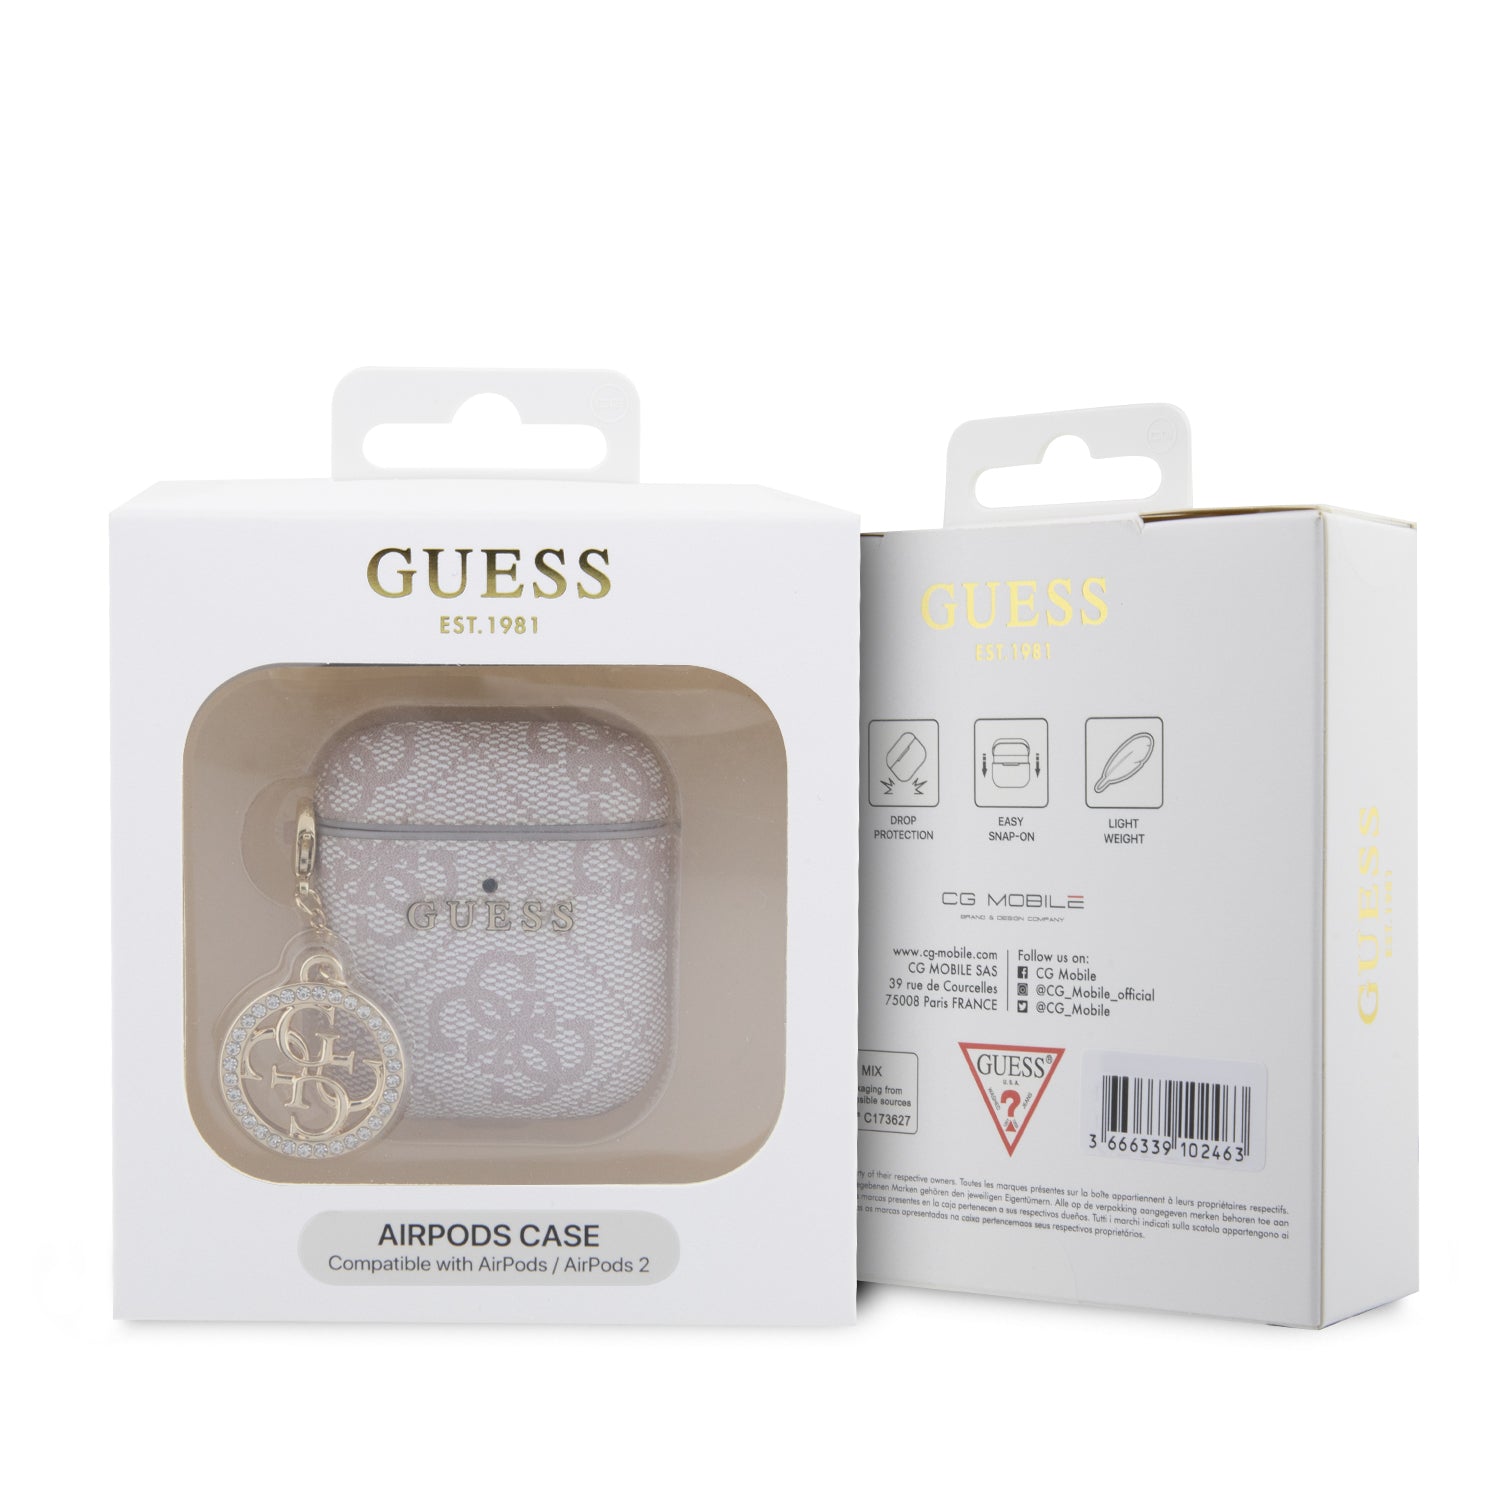 GUESS AIRPODS 1/2 PU 4G W/ STRASS CHARM PINK